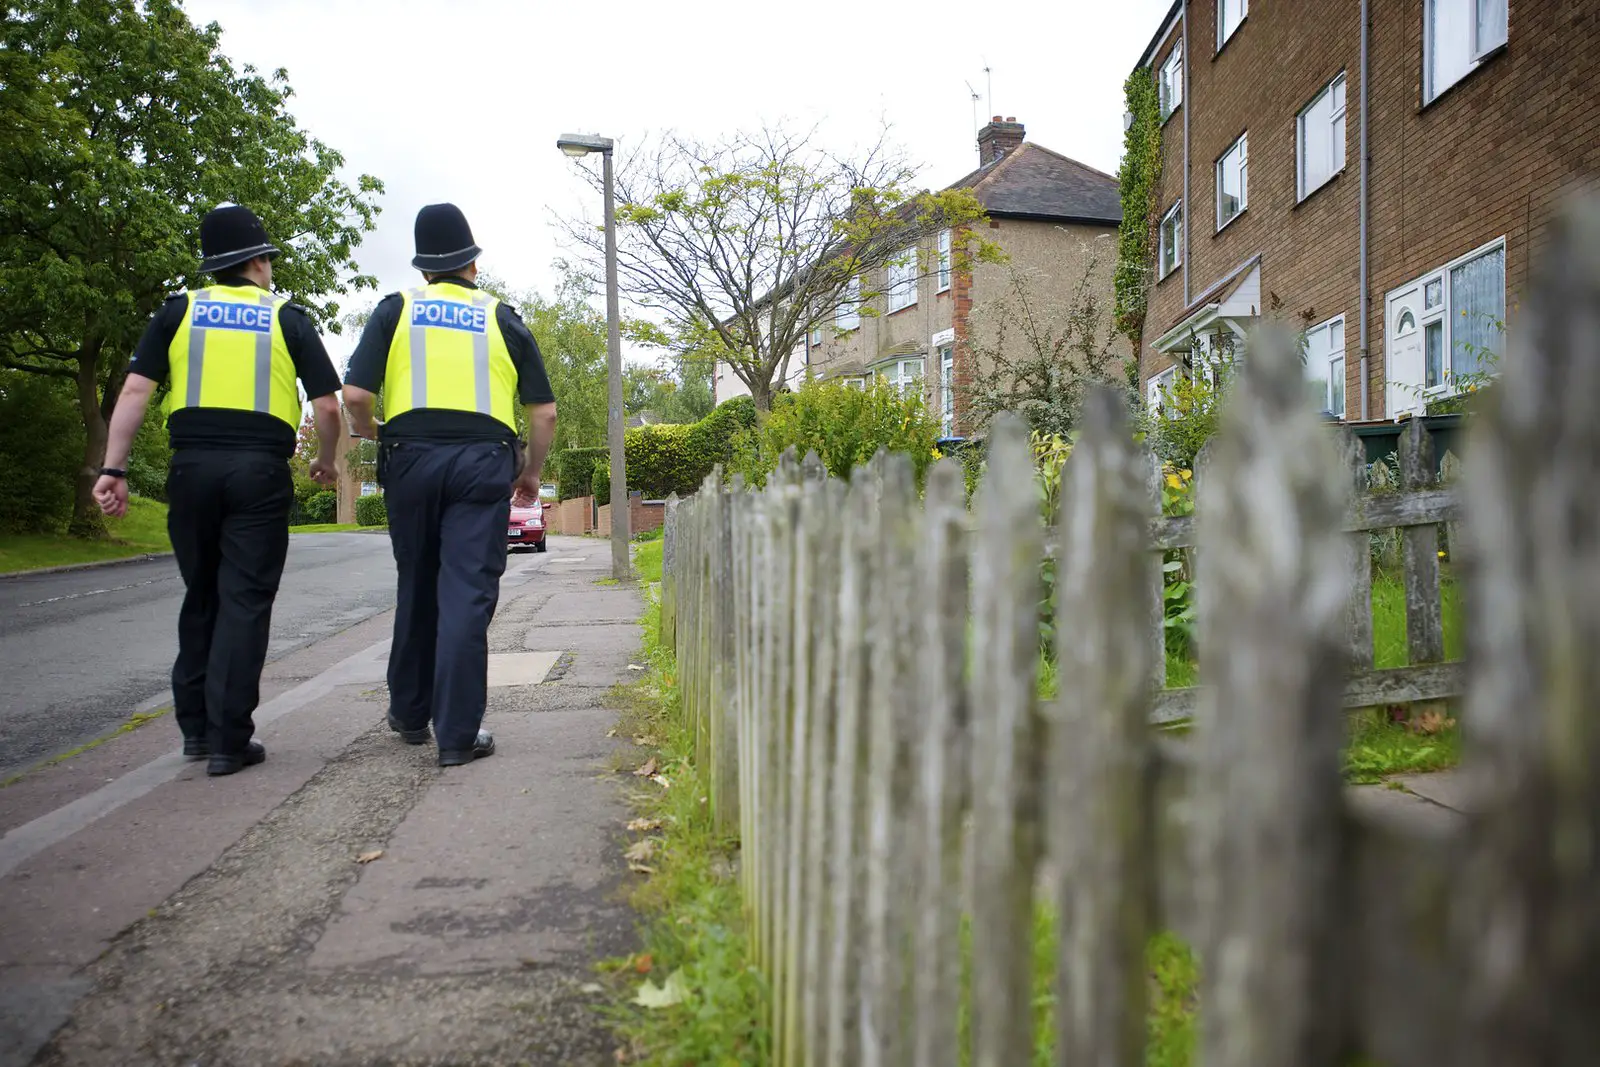 Special Constables walking down a residential street